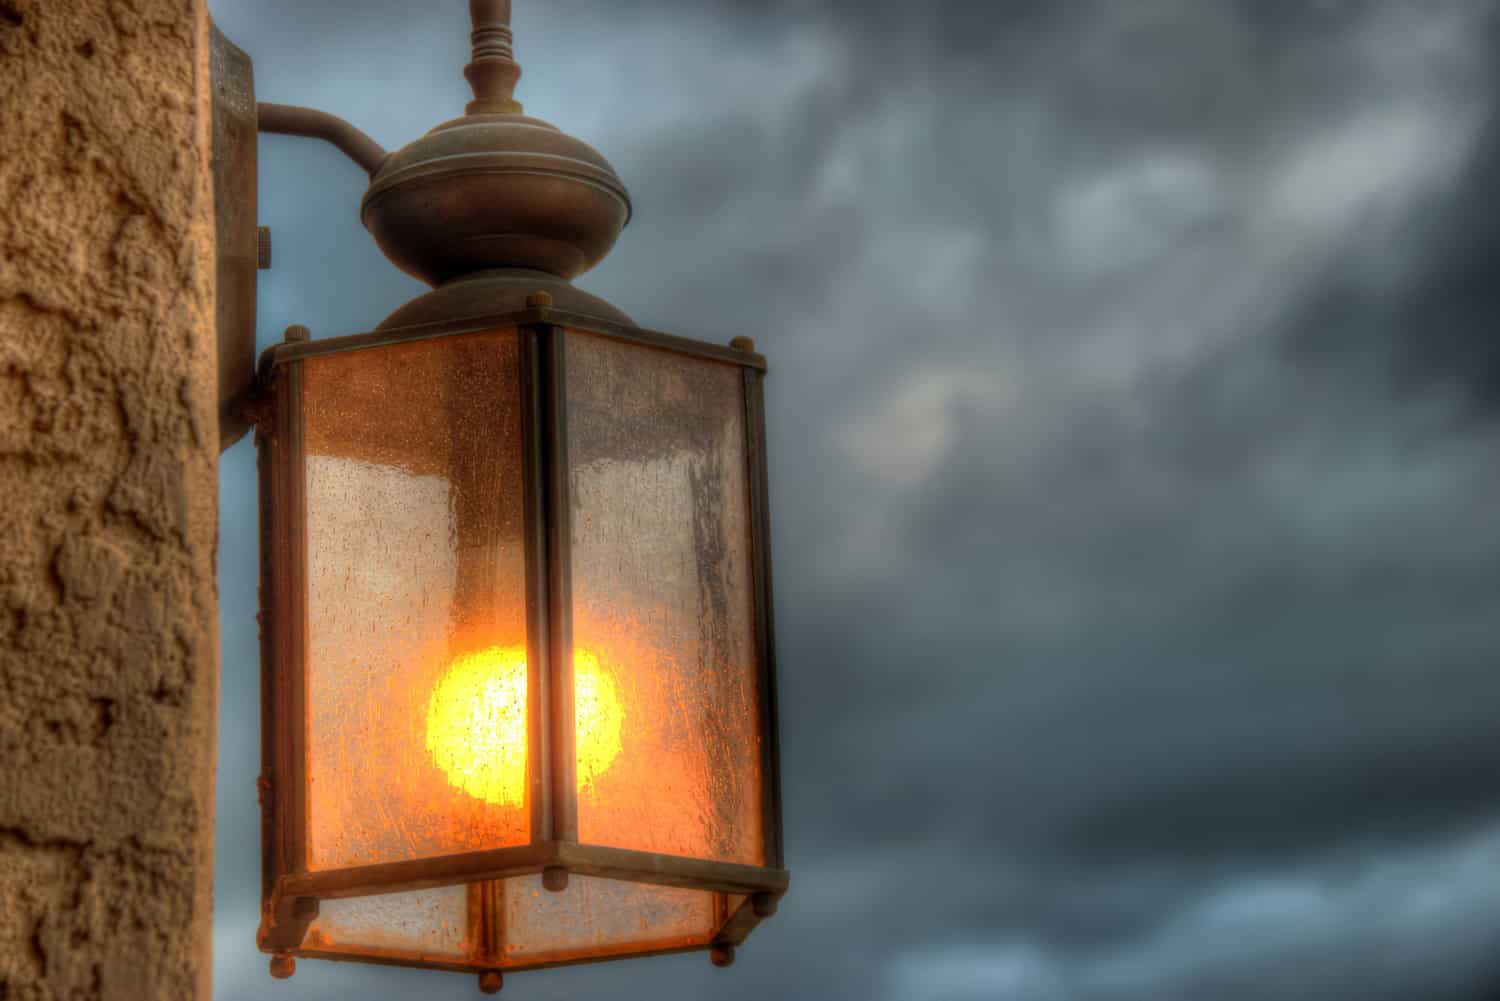 Solitary outdoor exterior wall mounted electrical lantern shining brightly in its glory of red, yellow, orange light against the background of heavily clouded, storm gathering sky.